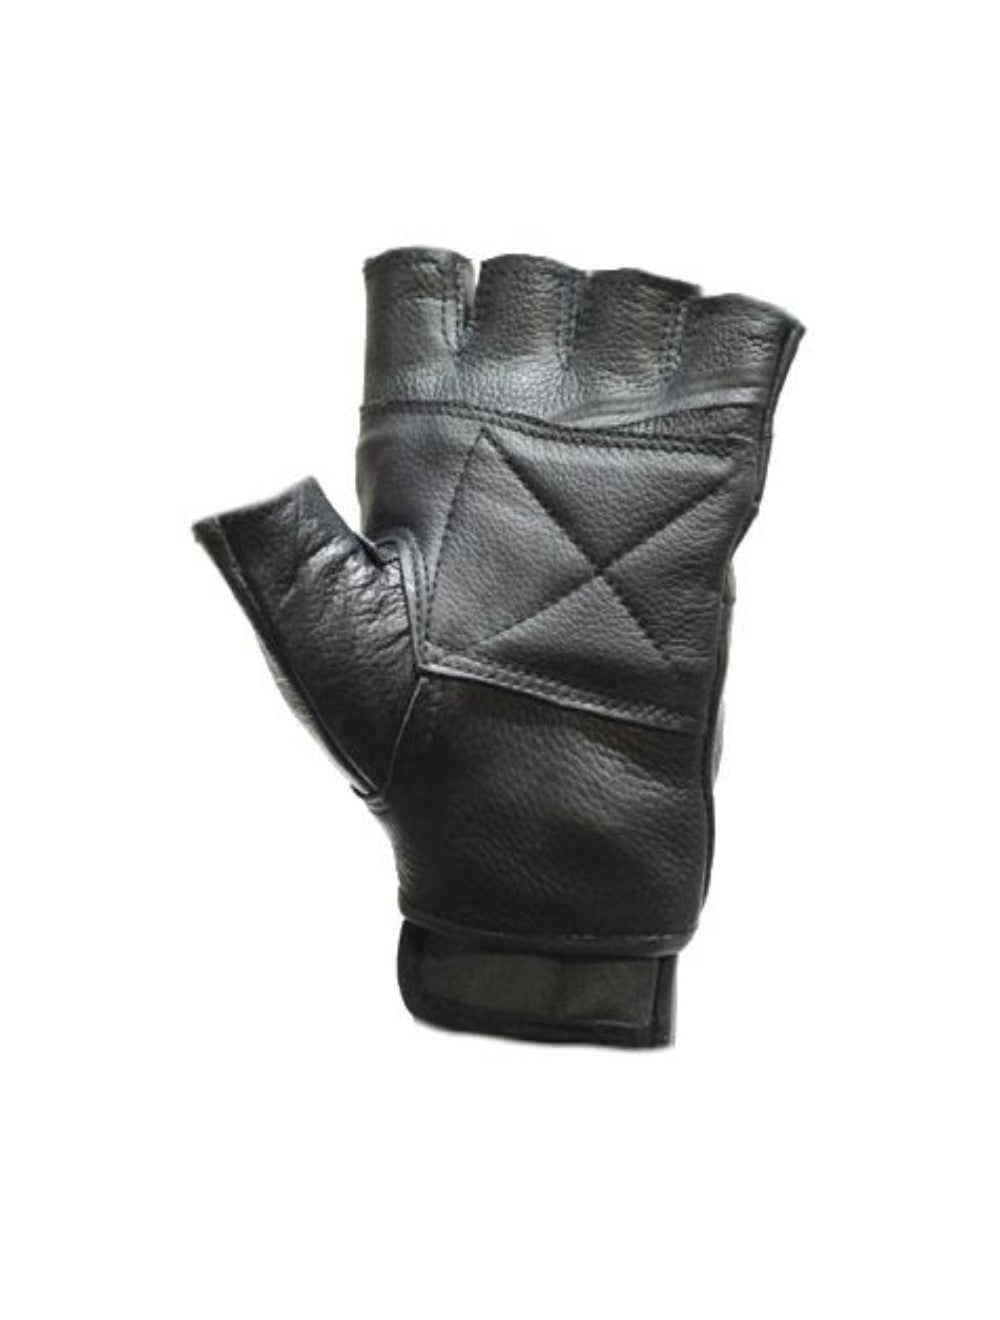 Top-Rated Motorcycle Fingerless Gloves